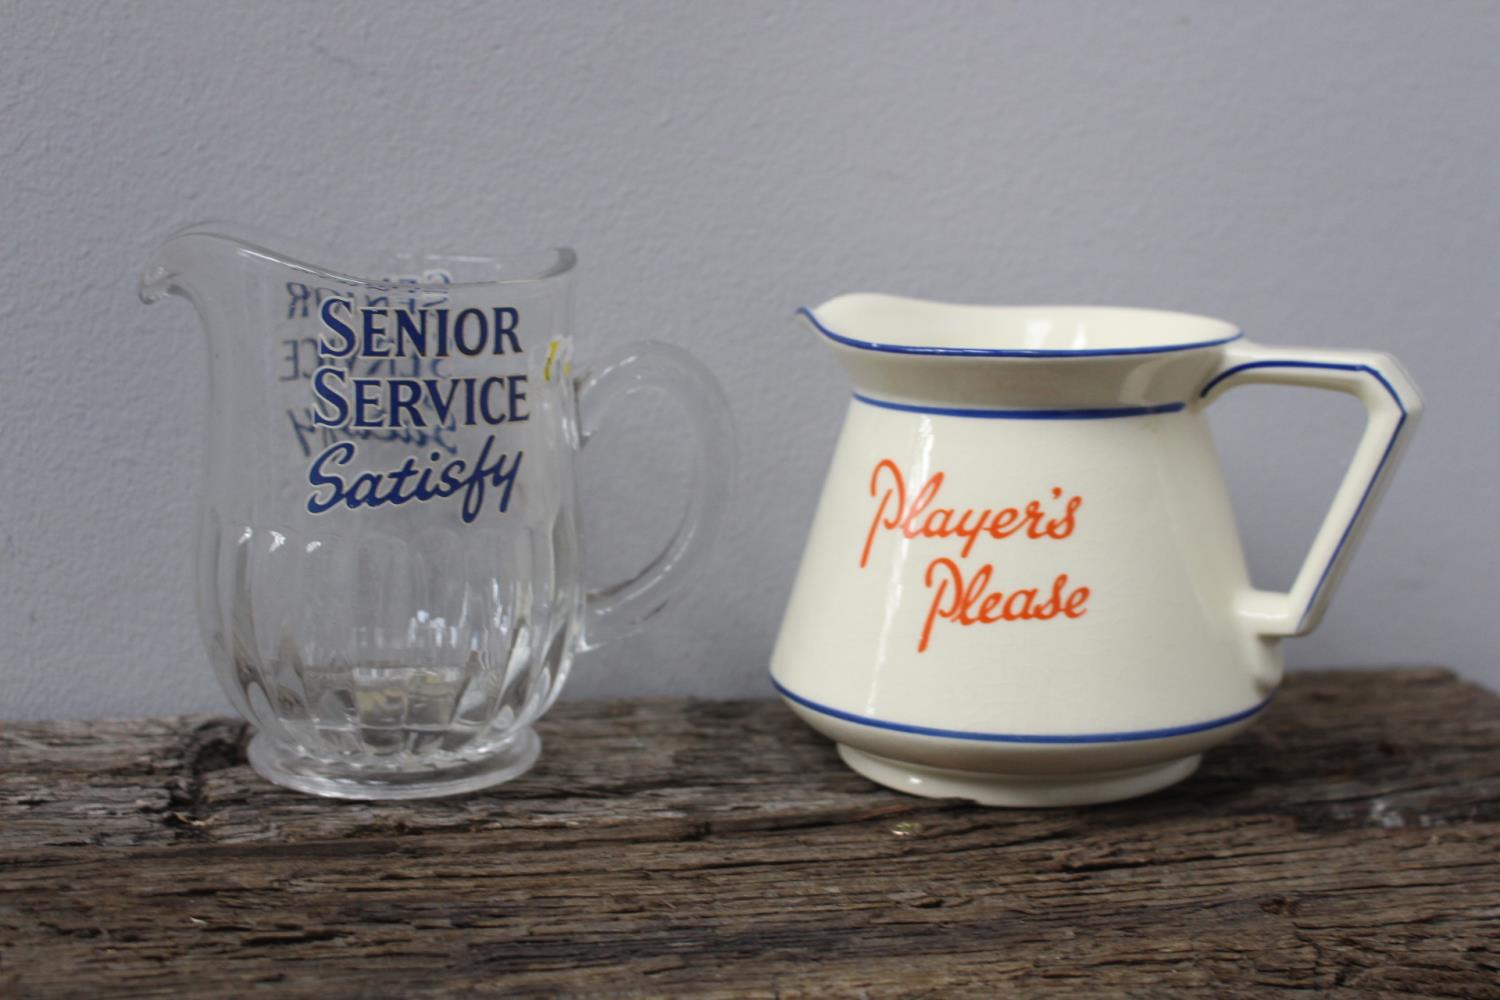 Pair of advertising water jugs - Senior Service Satisfy and Player's Please {10 cm H x 14 cm W and